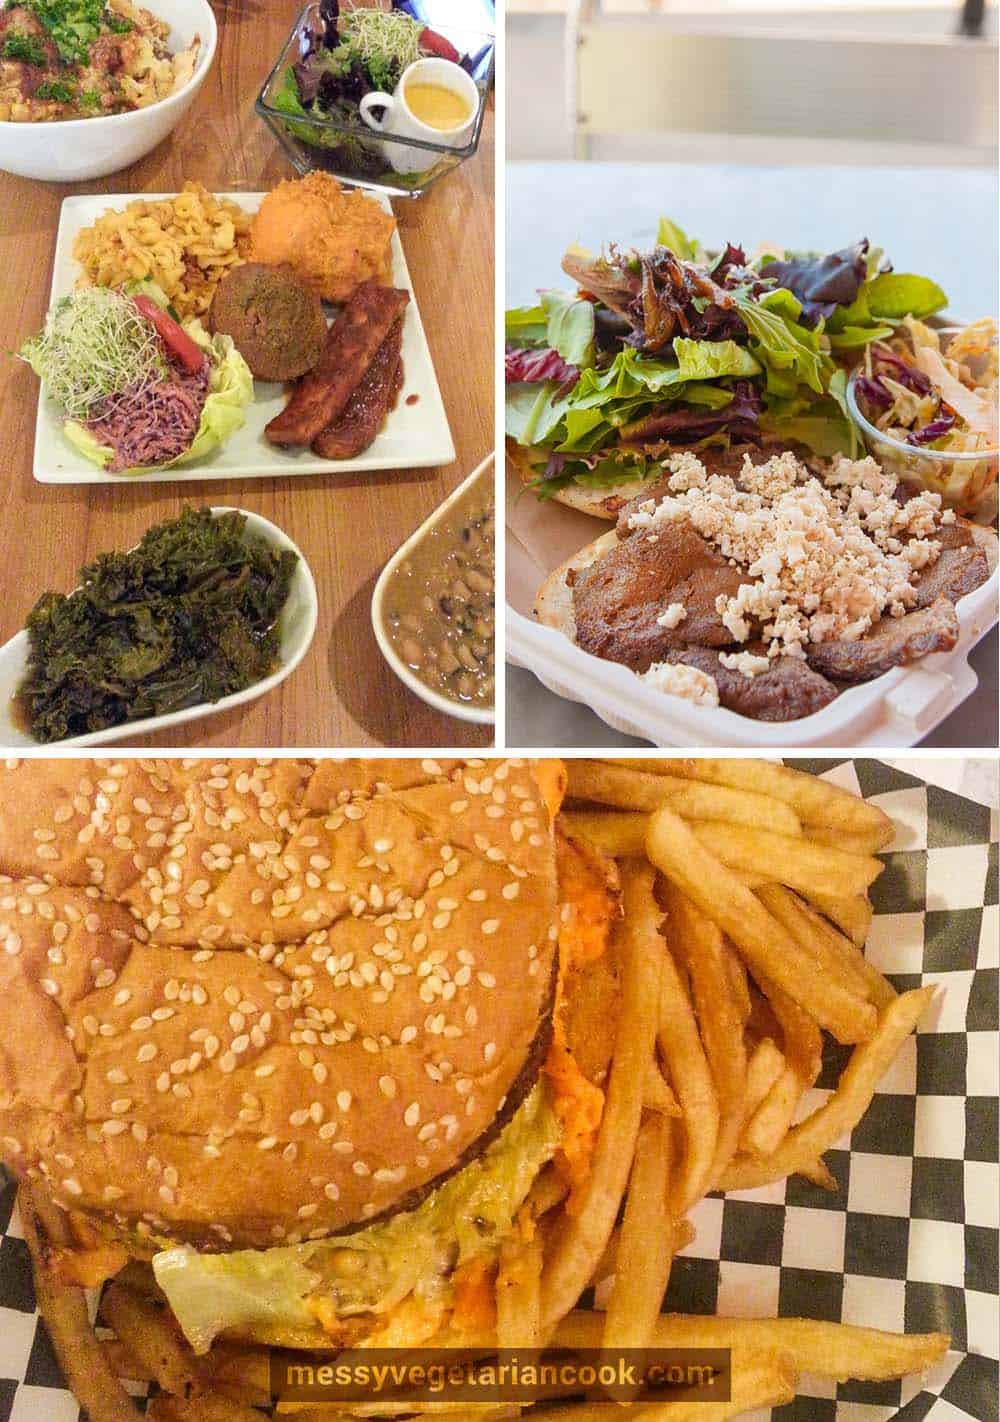 Soul food platter and enchilada pie from Stuff I Eat, burger from Seed Kitchen, vegan big mac from Doomies